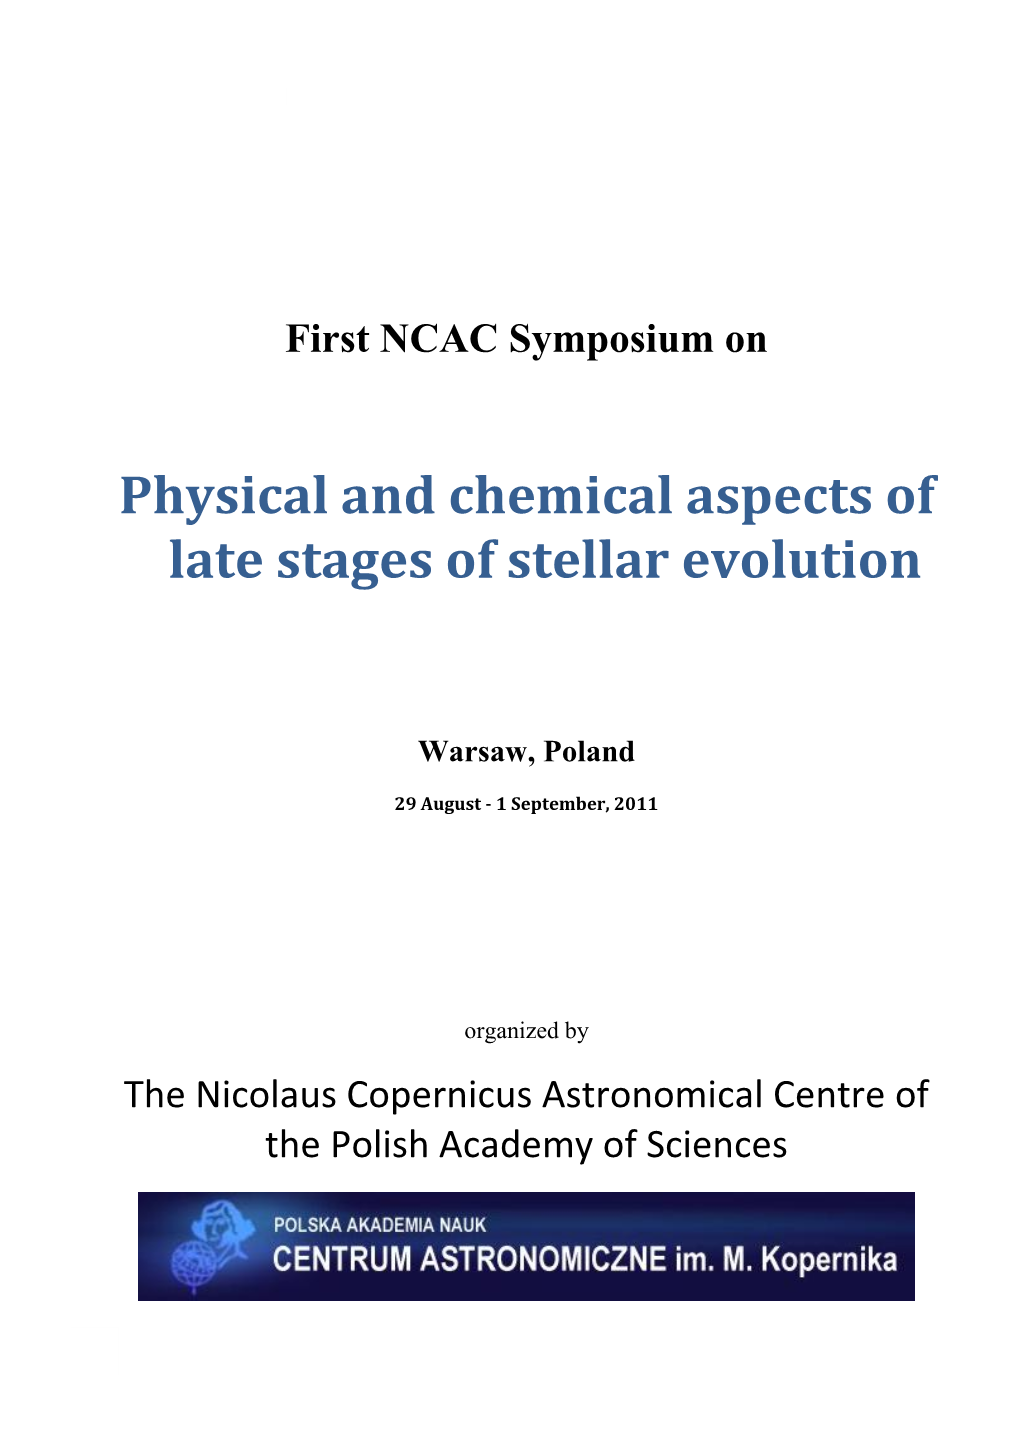 Physical and Chemical Aspects of Late Stages of Stellar Evolution